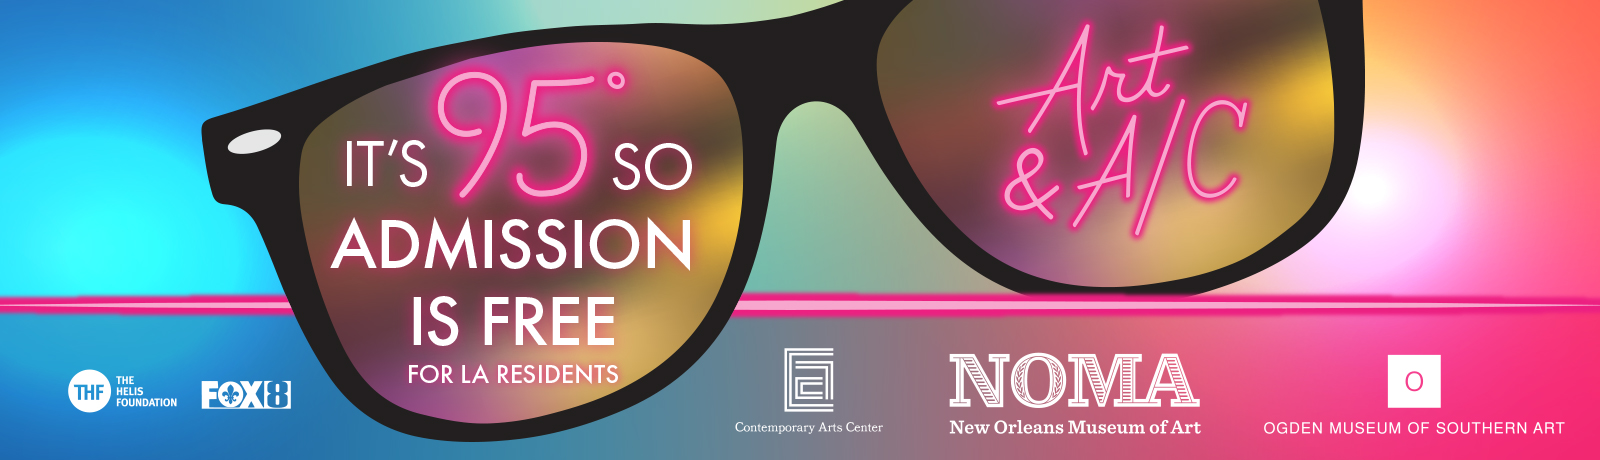 art and ac free admission to new orleans art institutions courtesy the helis foundation